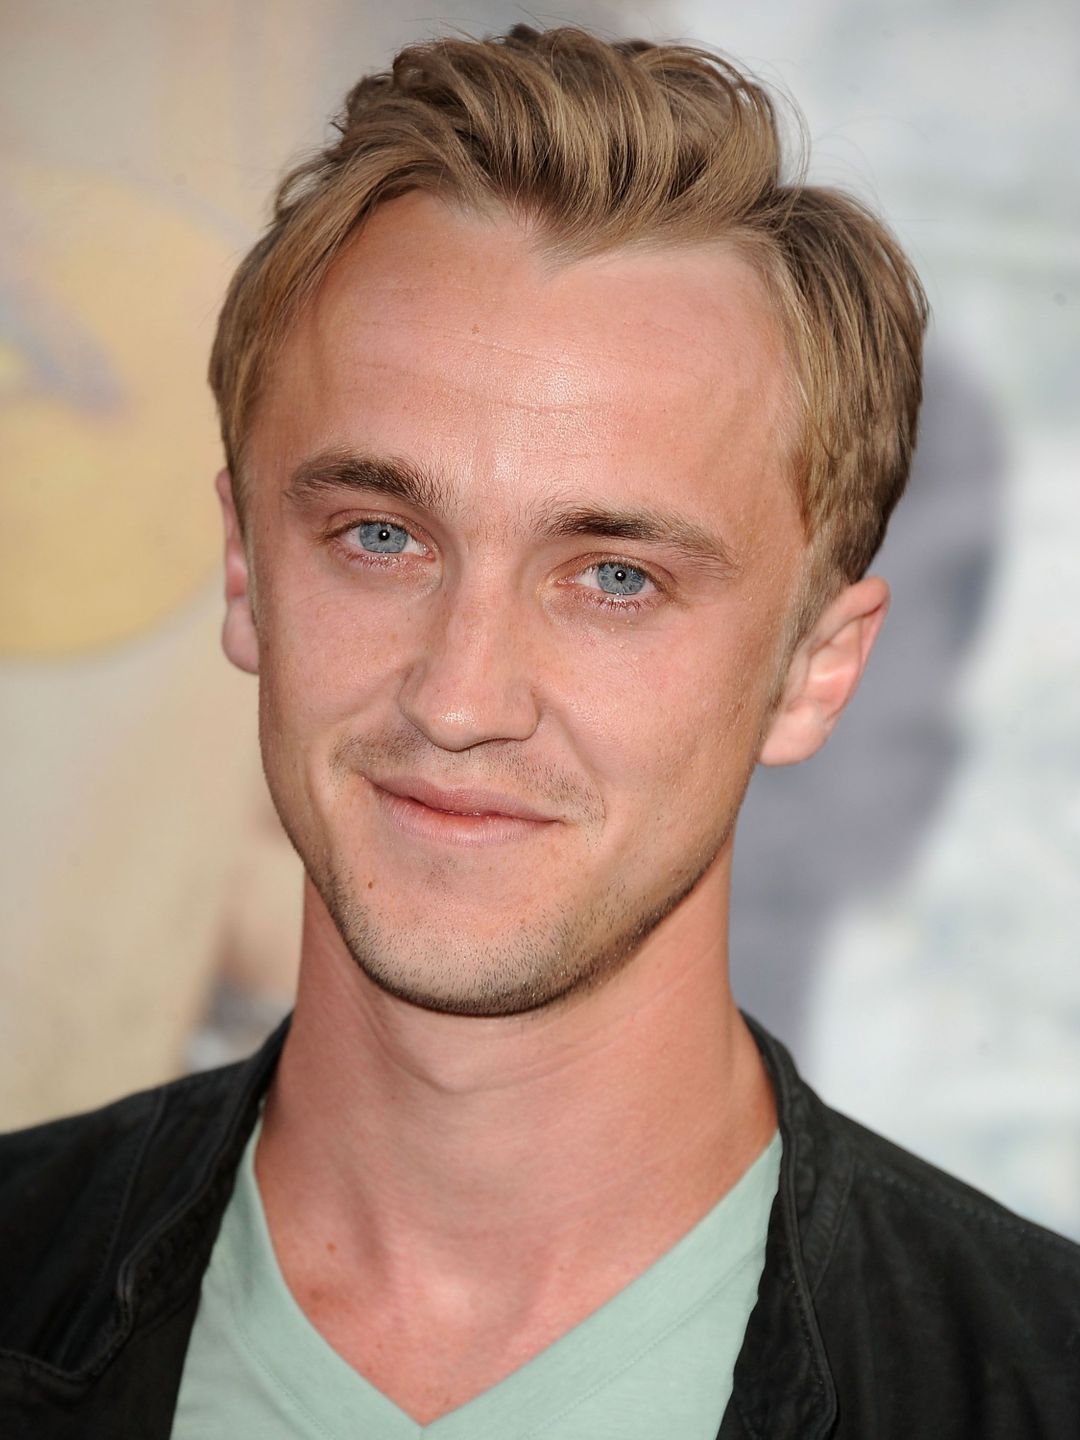 Tom Felton in his youth